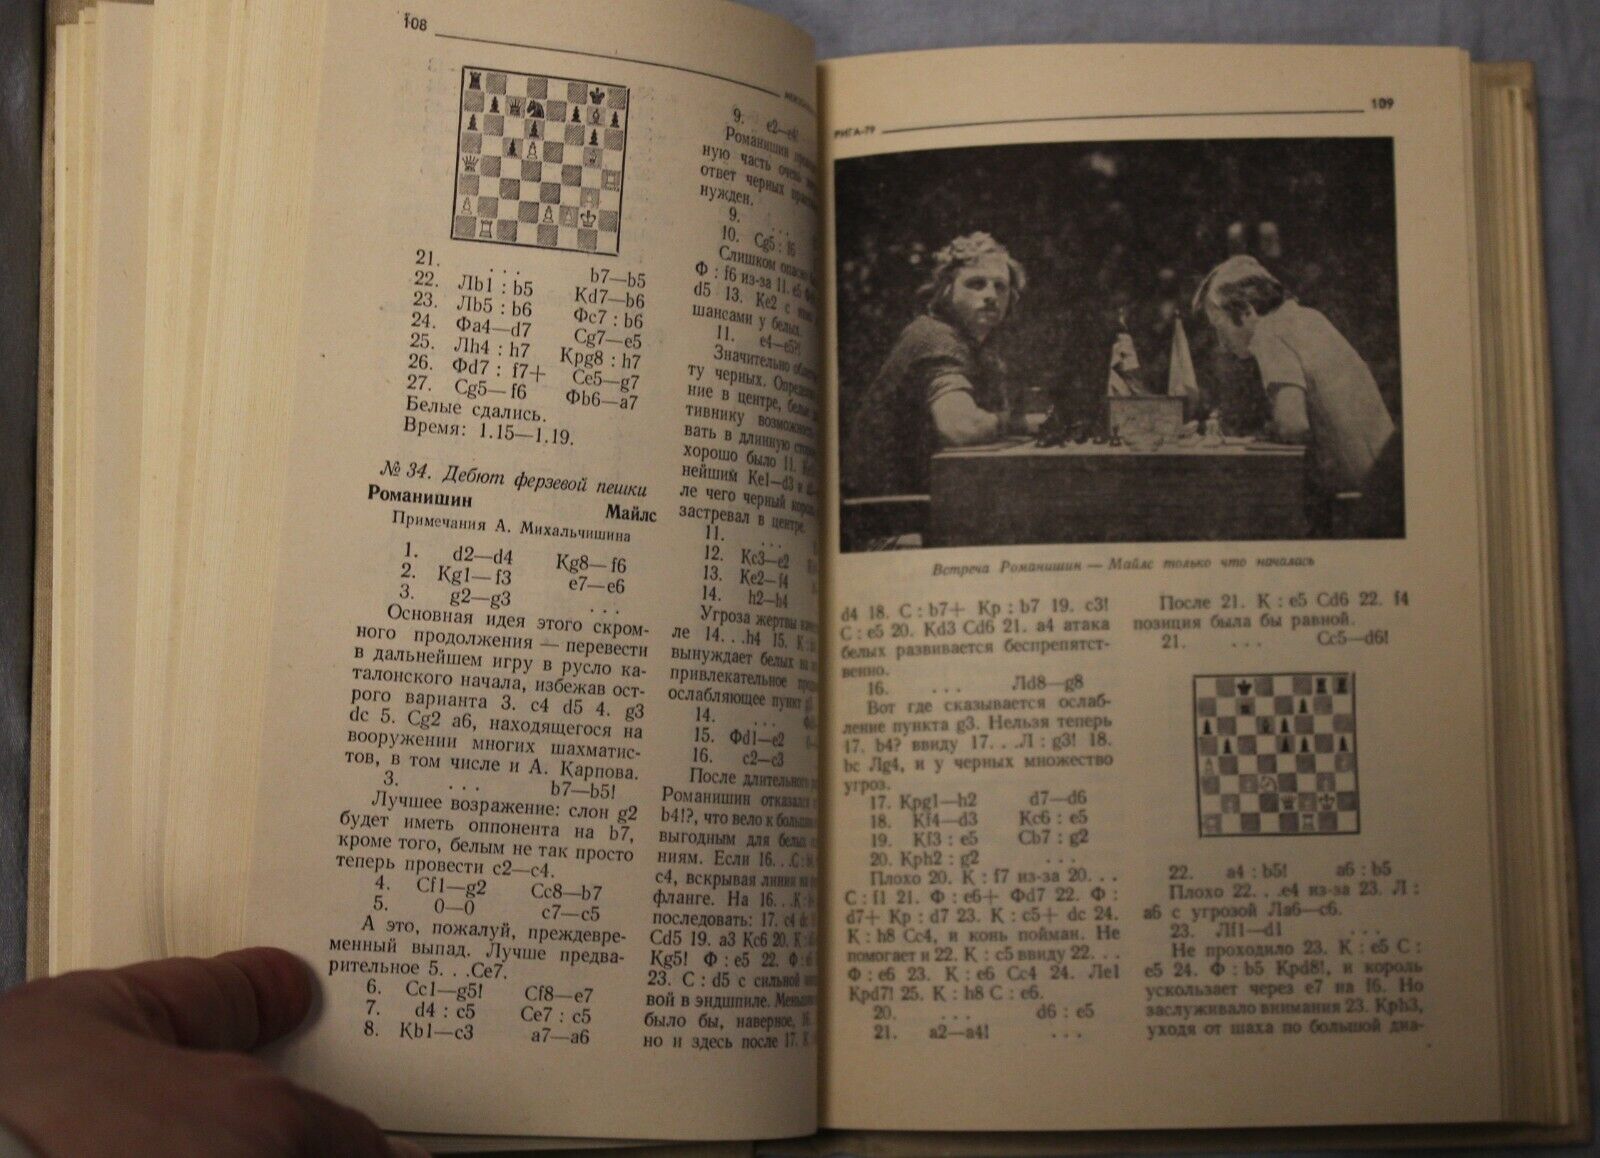 11017.Chess Book signed by Chepizhny for Pogosyants: Interzonal Chess Tournaments 1980